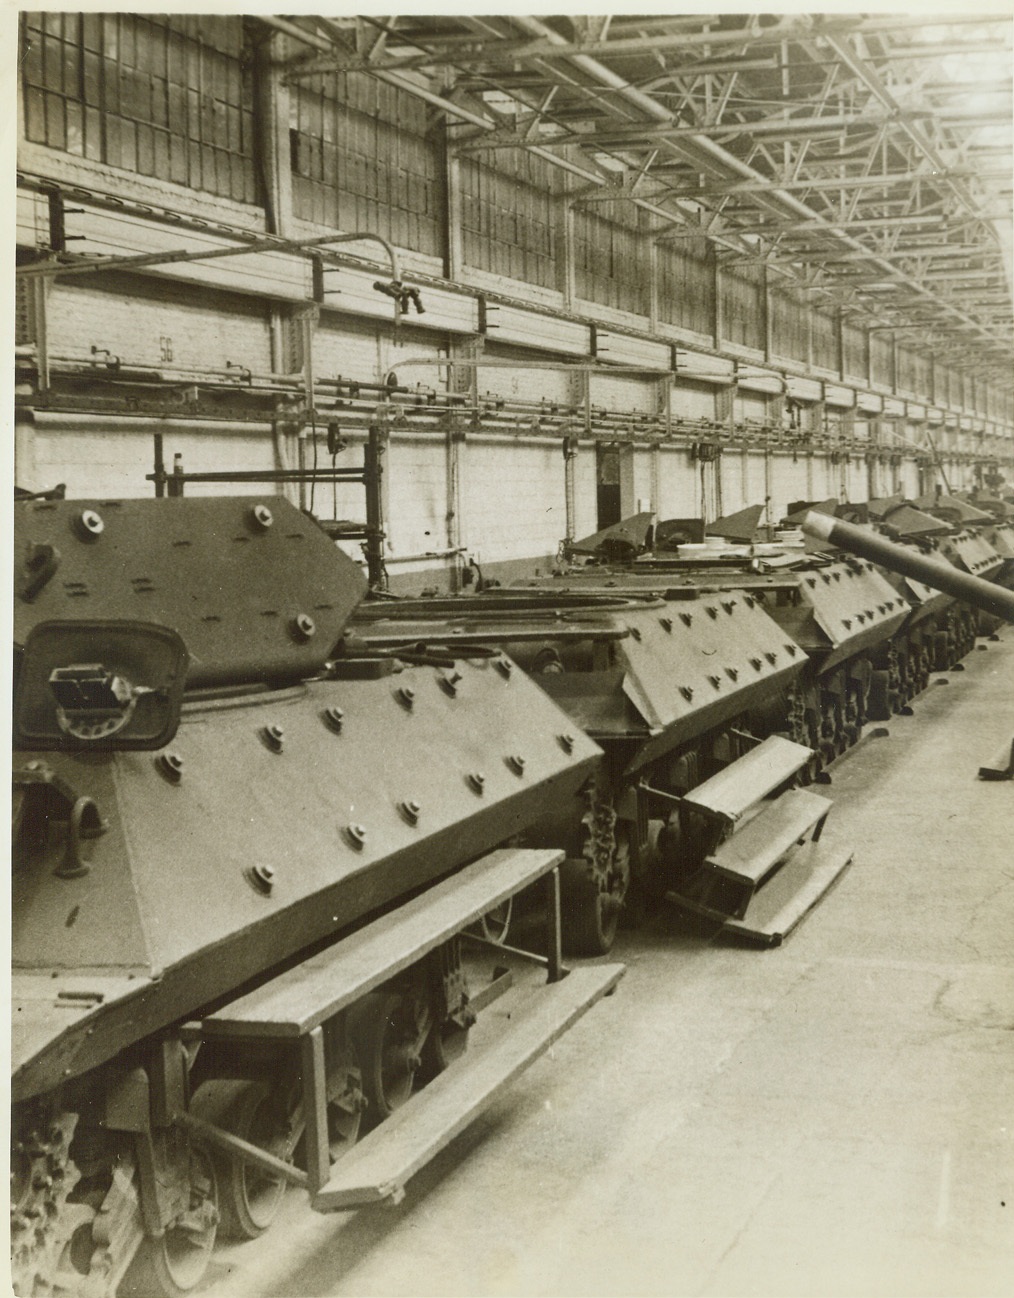 New Tank Busters on Production Line, 3/11/1943. DETROIT, MICH. – A long line of new M-10 tank destroyers minus their treads, on the production line at a Detroit plant of the Ford Motor Co. These hard-hitting tank busters have been rolling out of the plant for several months and have seen action in North Africa, where they are pronounced a success by the Allies. The M-10 in left foreground has already had its turret put in place. Next one in line waits for its turret, the gun of which can be seen at right, (center of photo). Credit: (ACME);